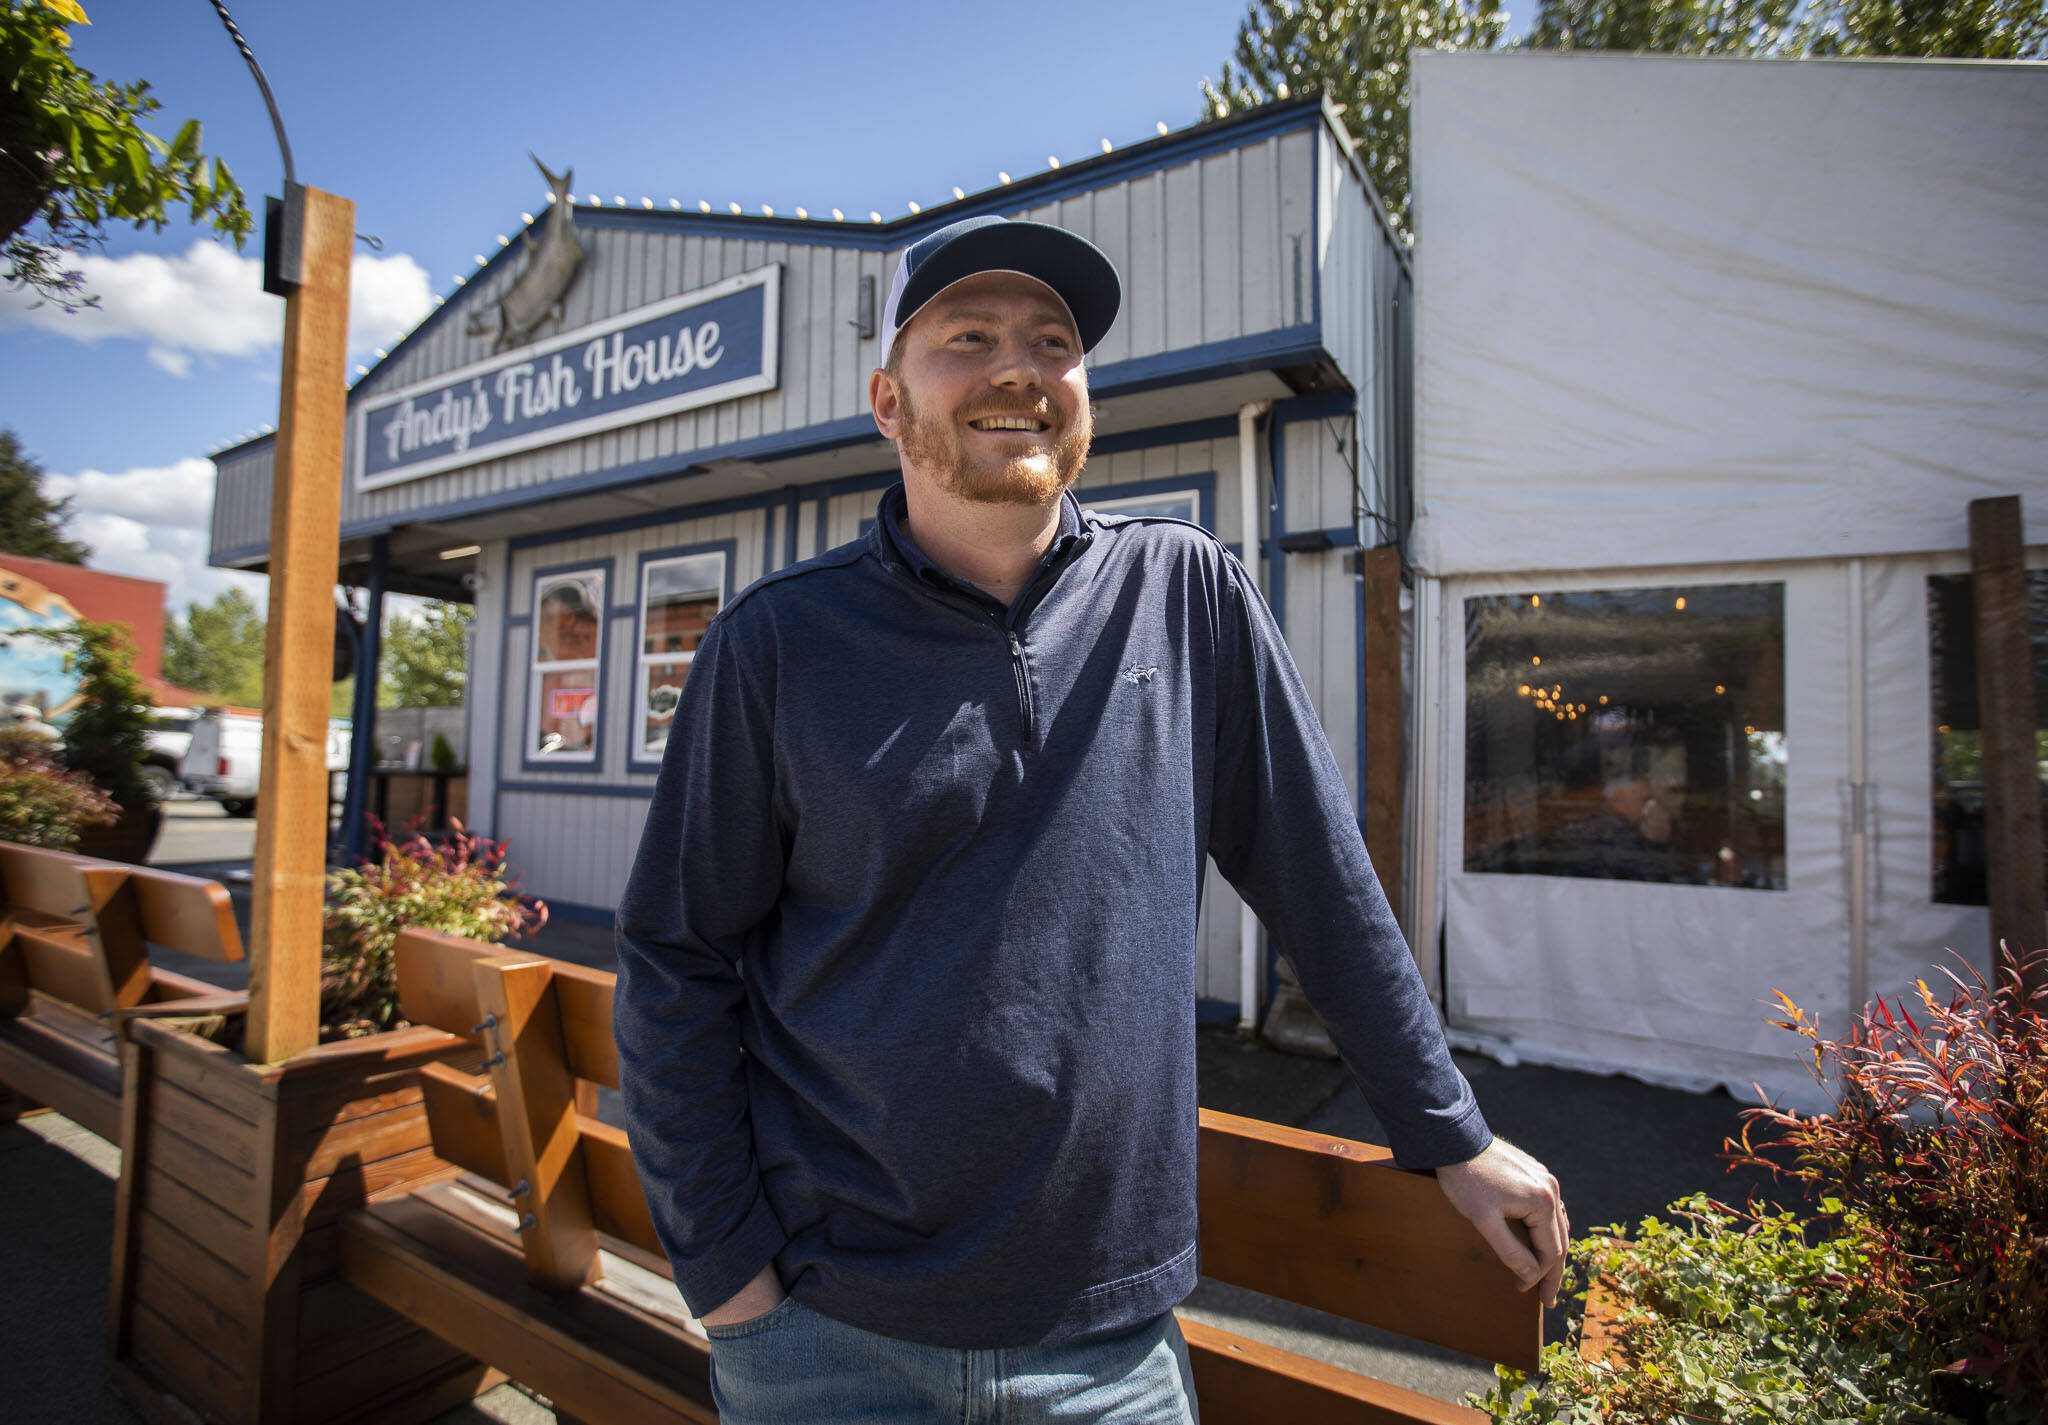 photos by Olivia Vanni / The Herald
Andy Gibbs, co-owner of Andy’s Fish House, stands outside of his restaurant on May 1 in Snohomish.